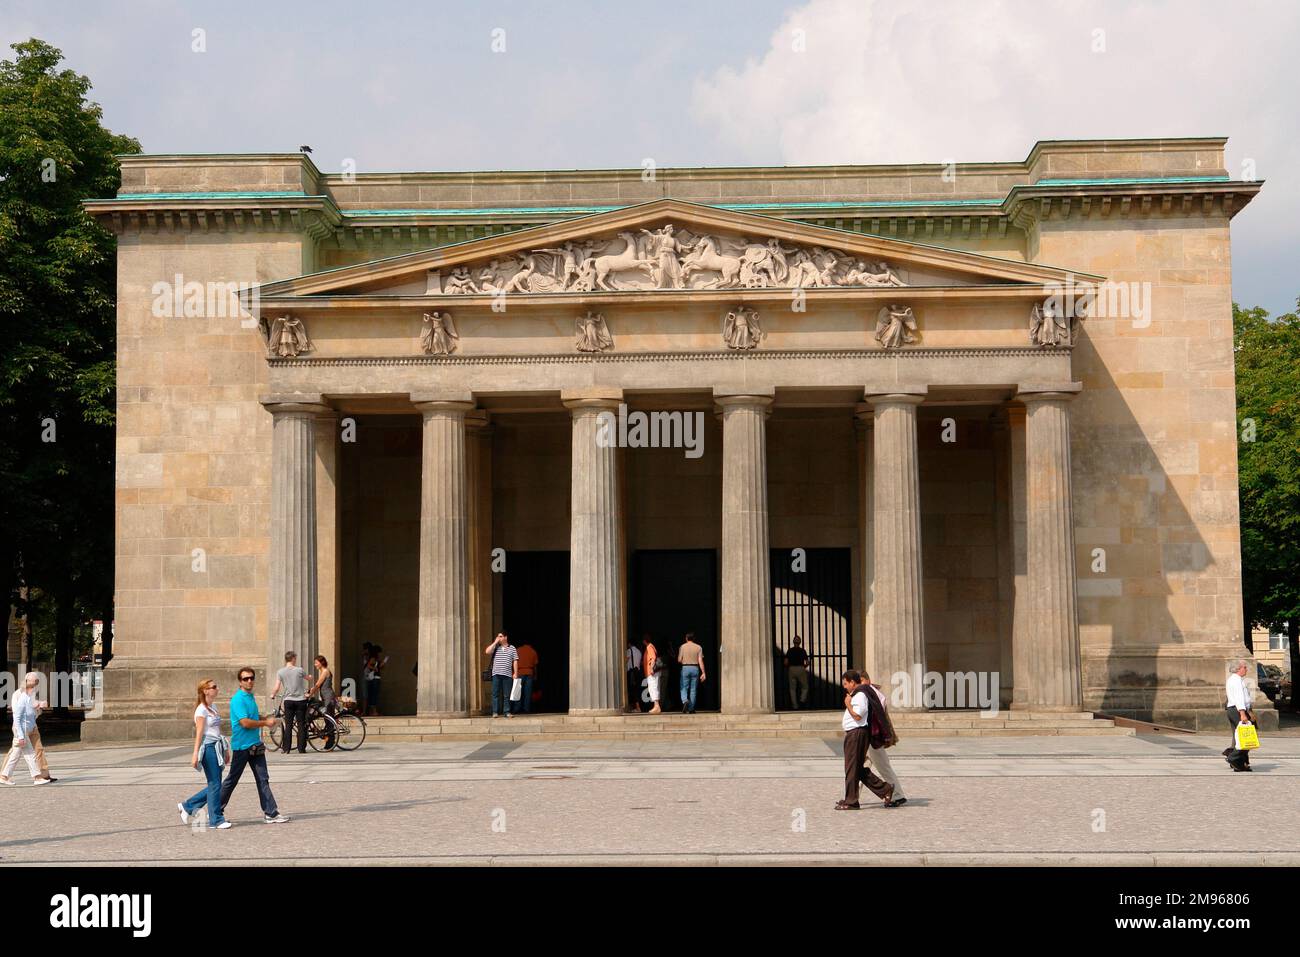 The Neue Wache (New Guard House), in central Berlin, dating from 1816.  Originally built as a guardhouse for the troops of the Crown Prince of Prussia, it has been used as a war memorial since 1931. Stock Photo